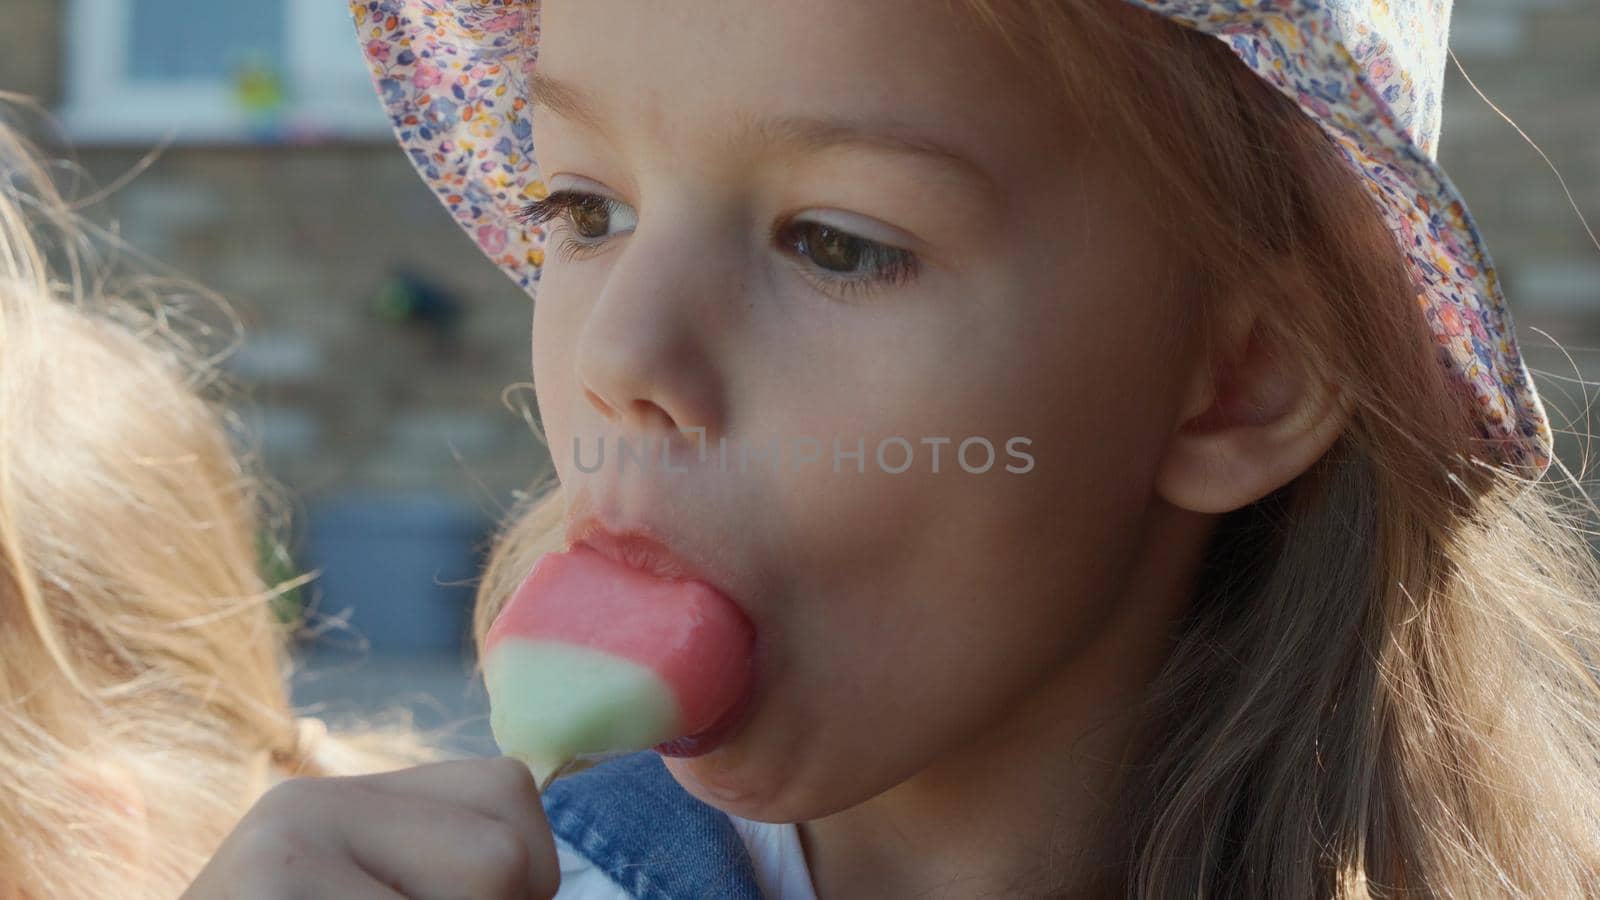 Close up portrait Girl enjoys delicious ice cream cone. Child eating watermelon popsicle. Kids Siblings snack sweets in Home Garden. Summer holiday Hot weather Sunny Day. Childhood, Food Candy Friends